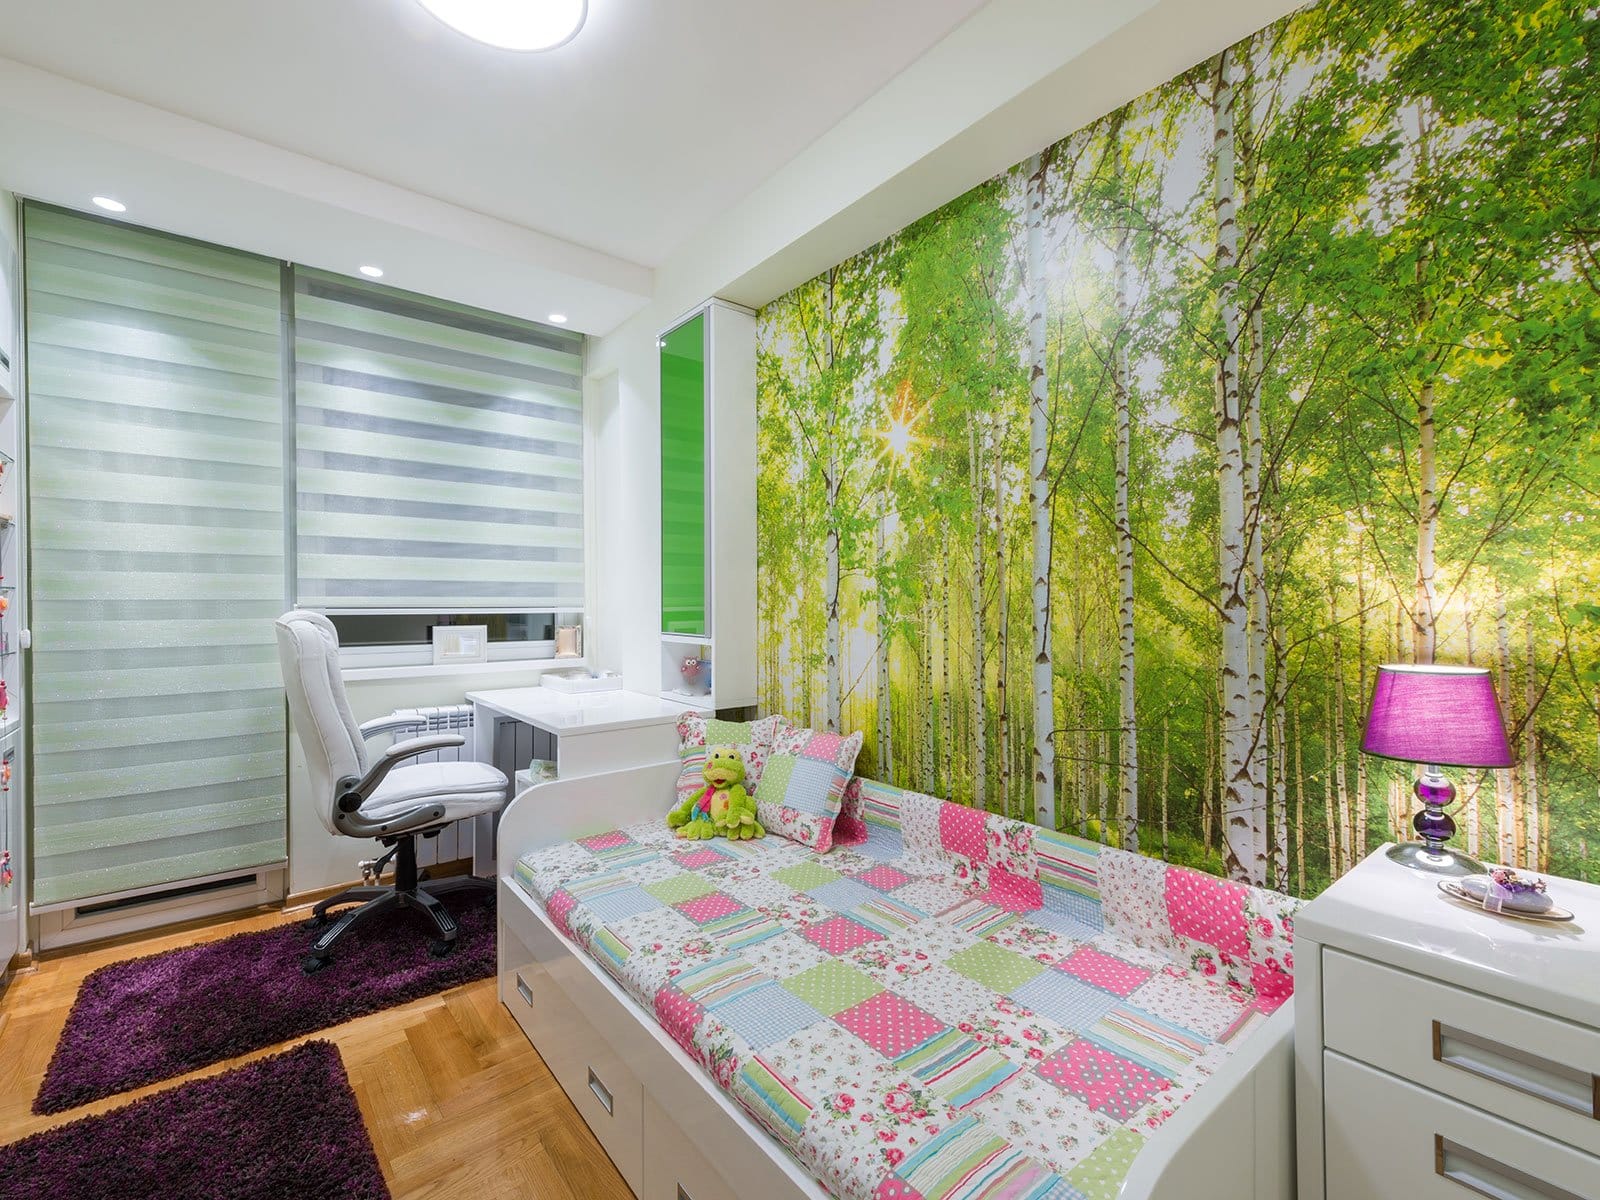 Wallpaper Printing Smooth | Trade prices from £ sqm